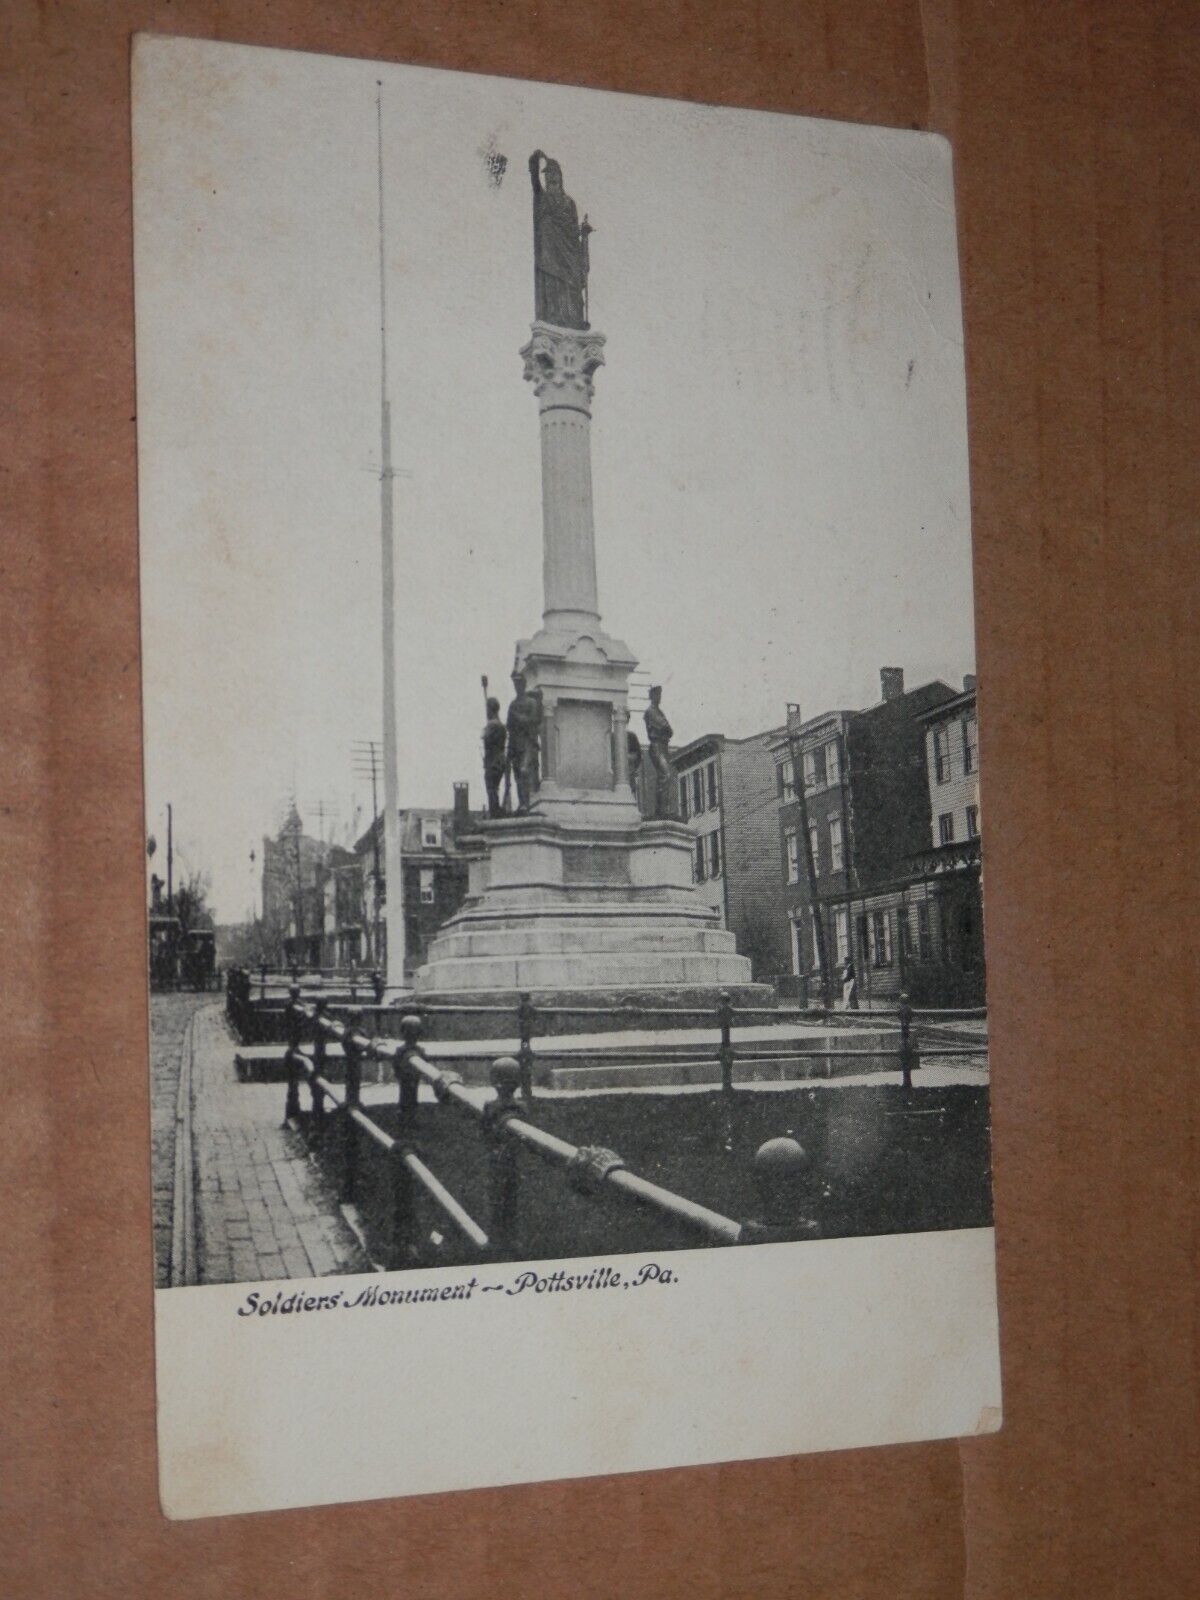 POTTSVILLE PA - 1908 USED POSTCARD - SOLDIERS\' MONUMENT